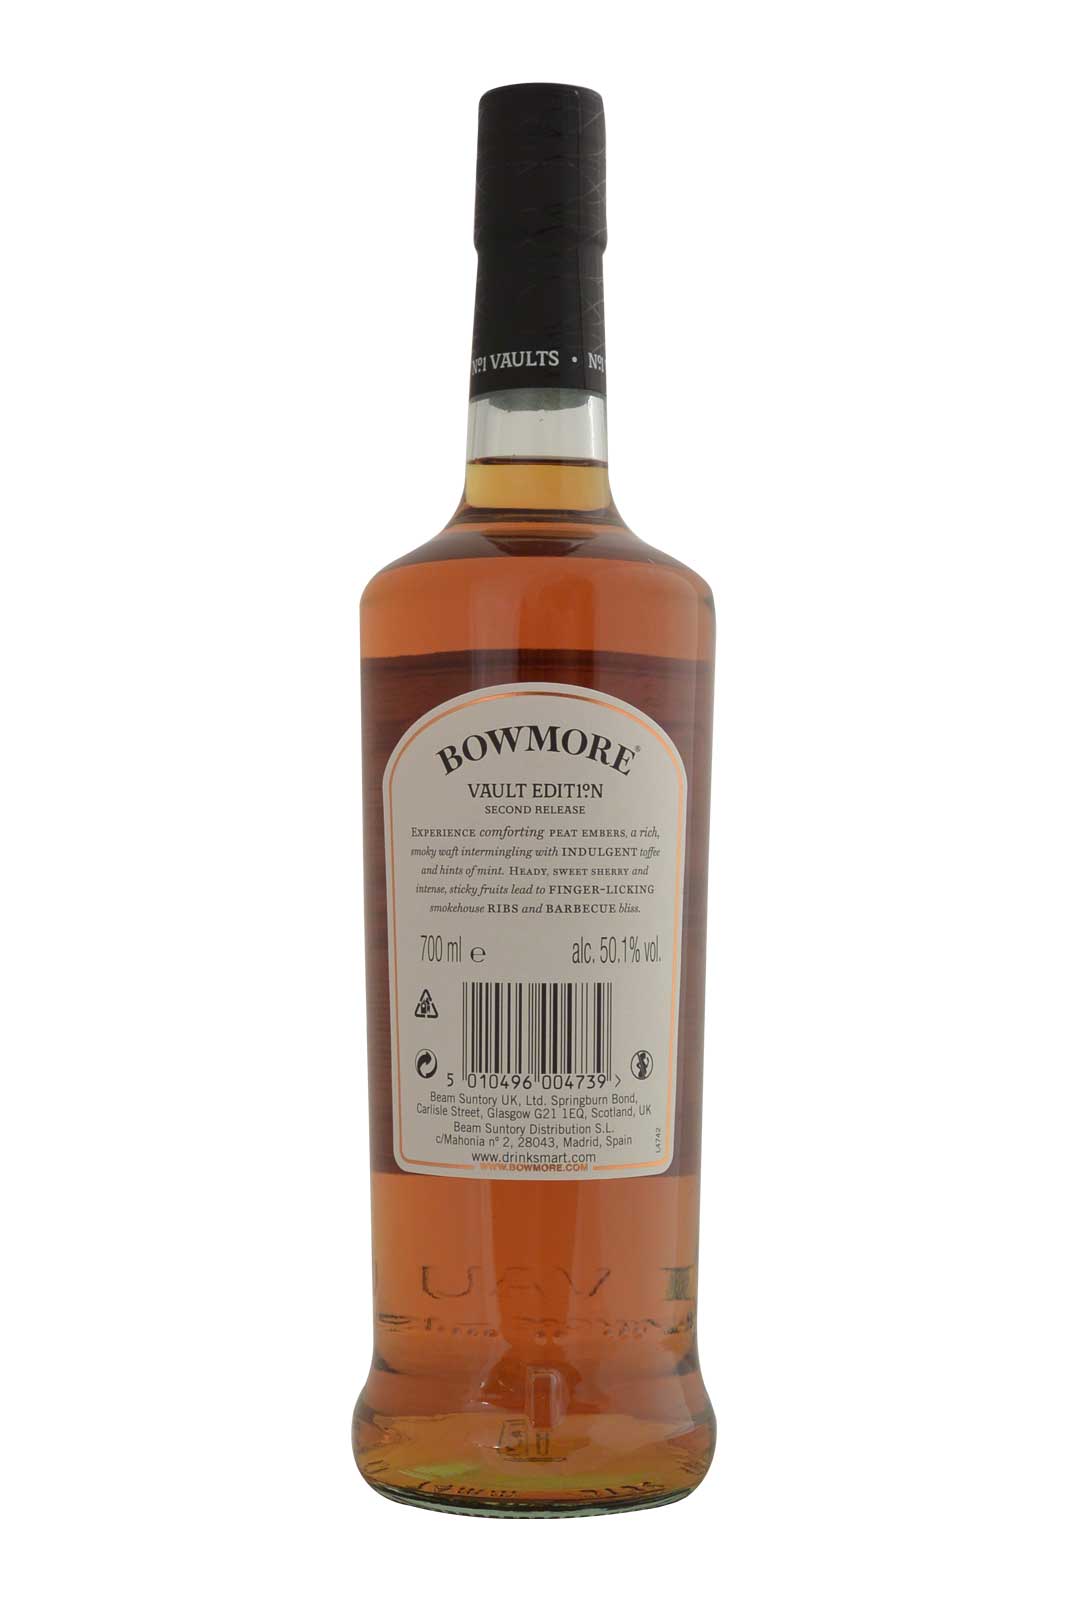 Bowmore Vault Edition N° 1 Second Release